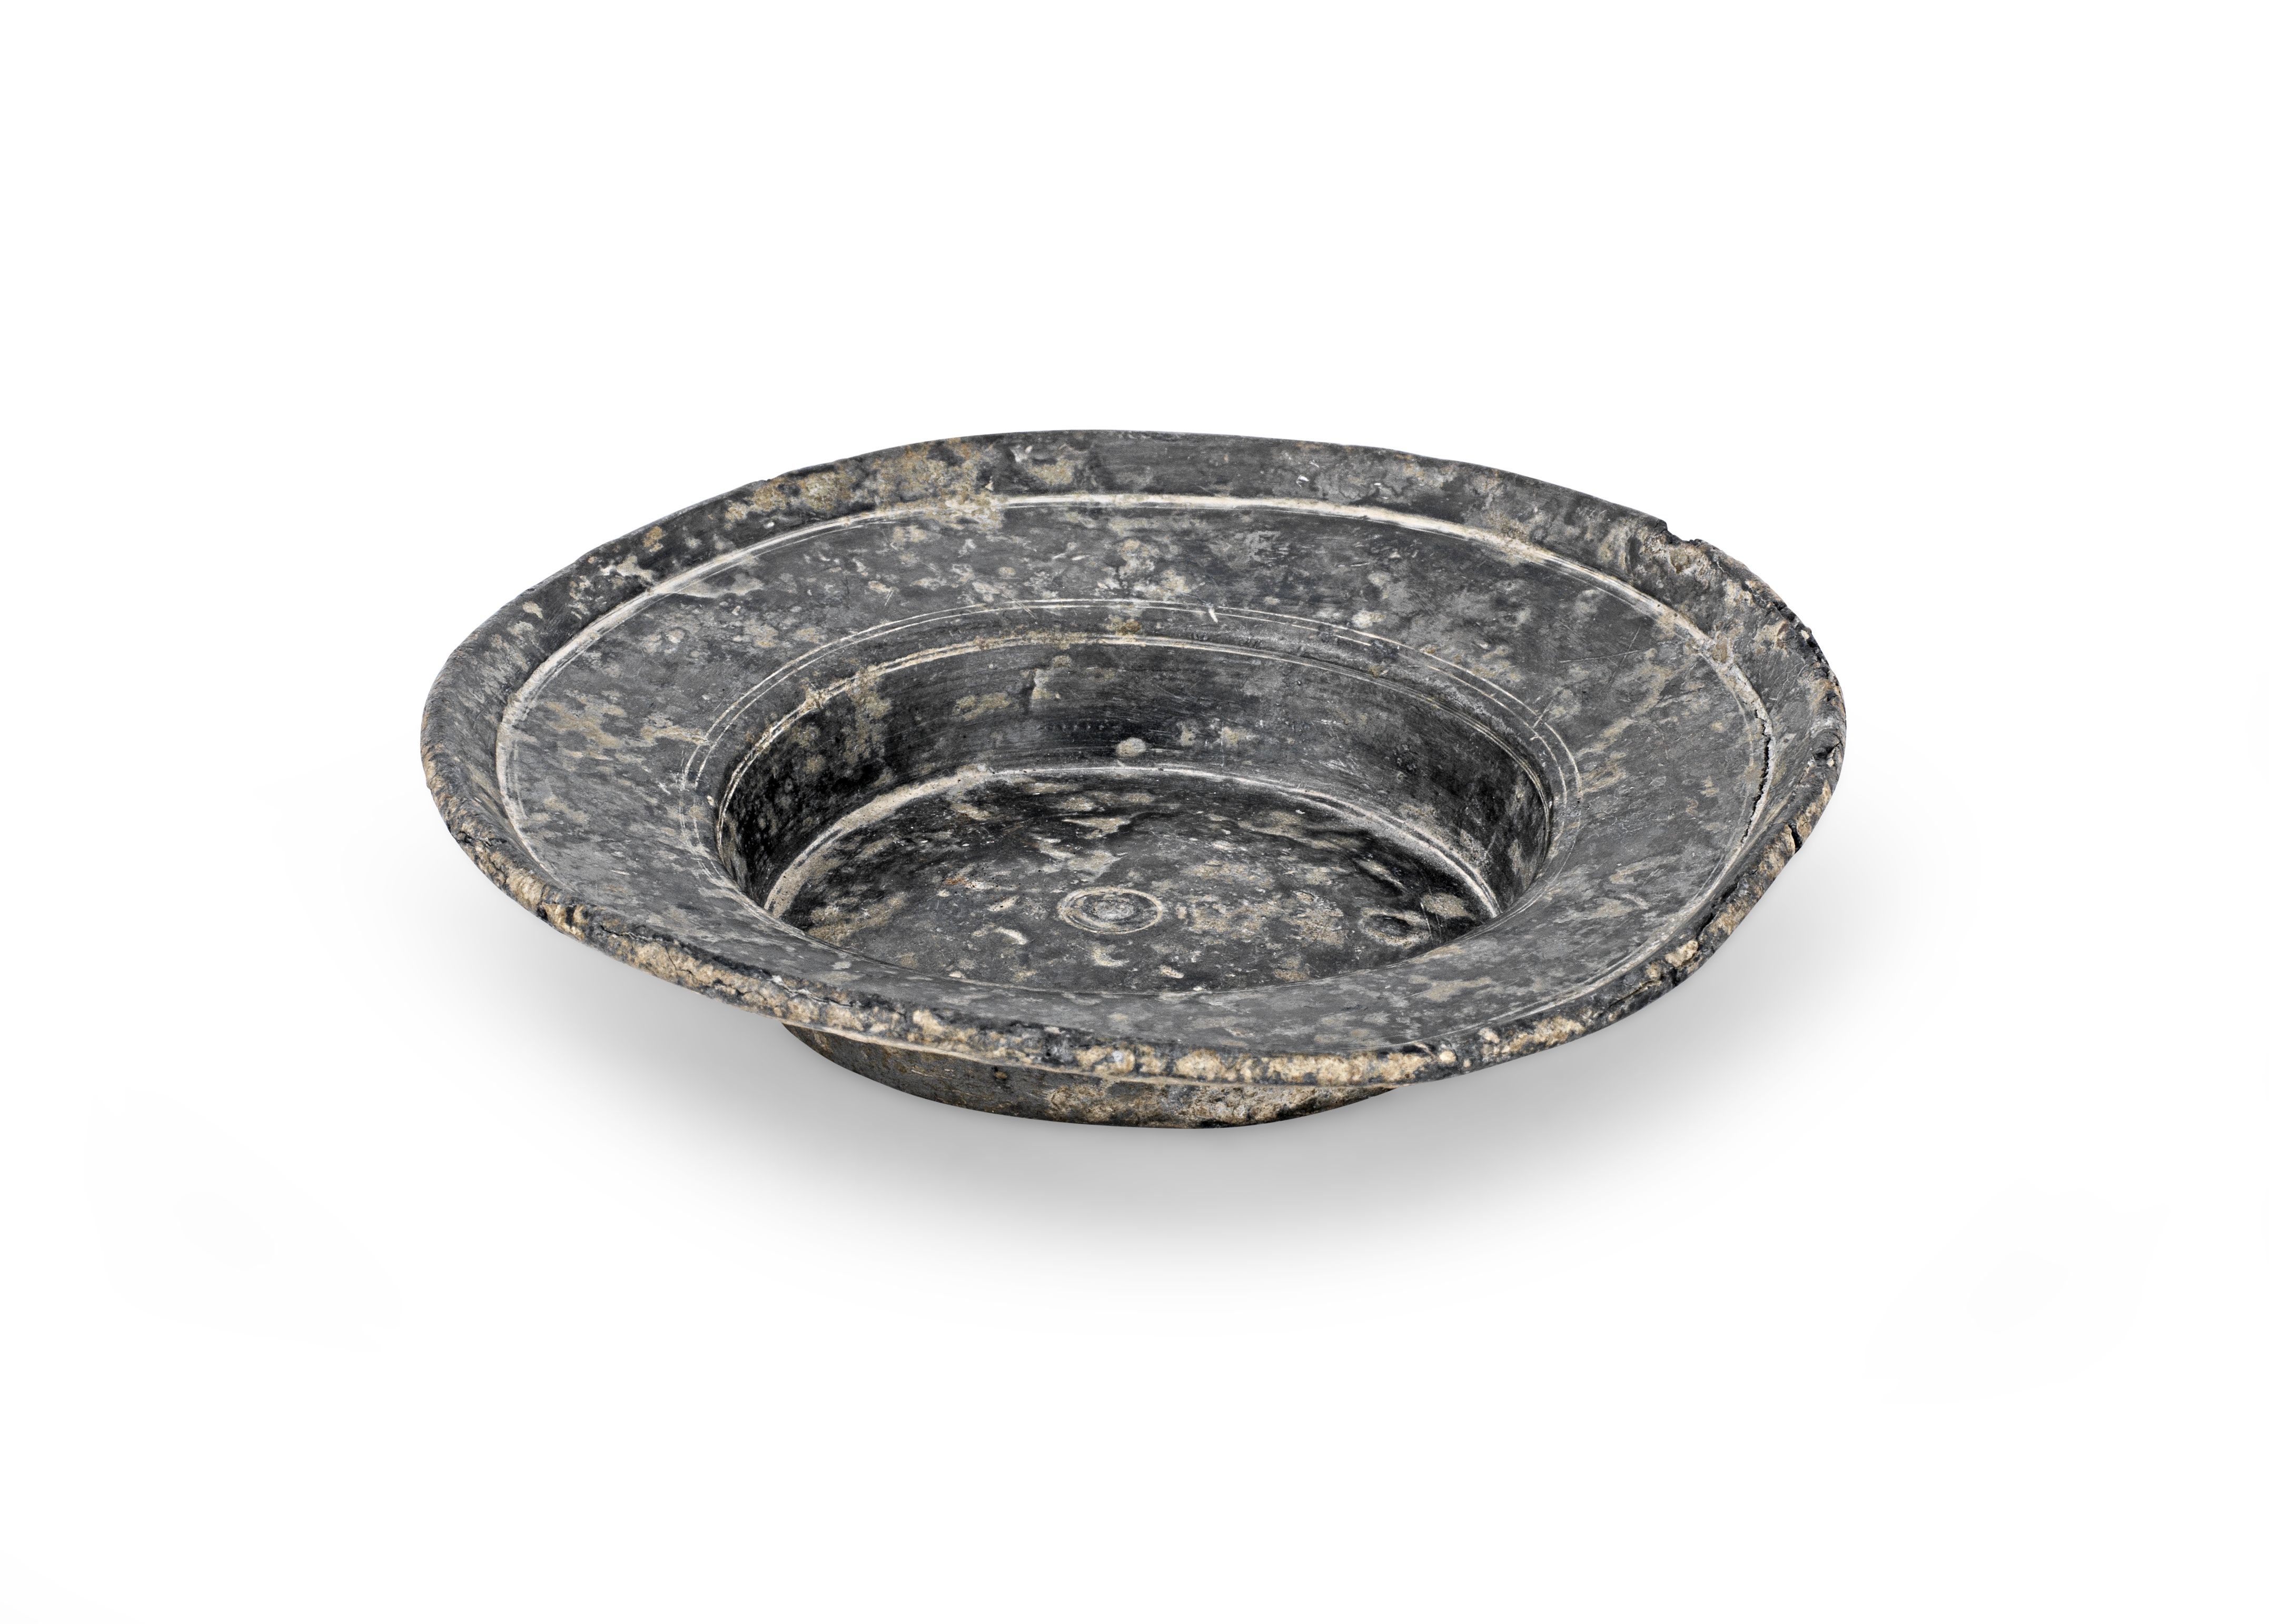 A rare Medieval pewter spice plate, probably English